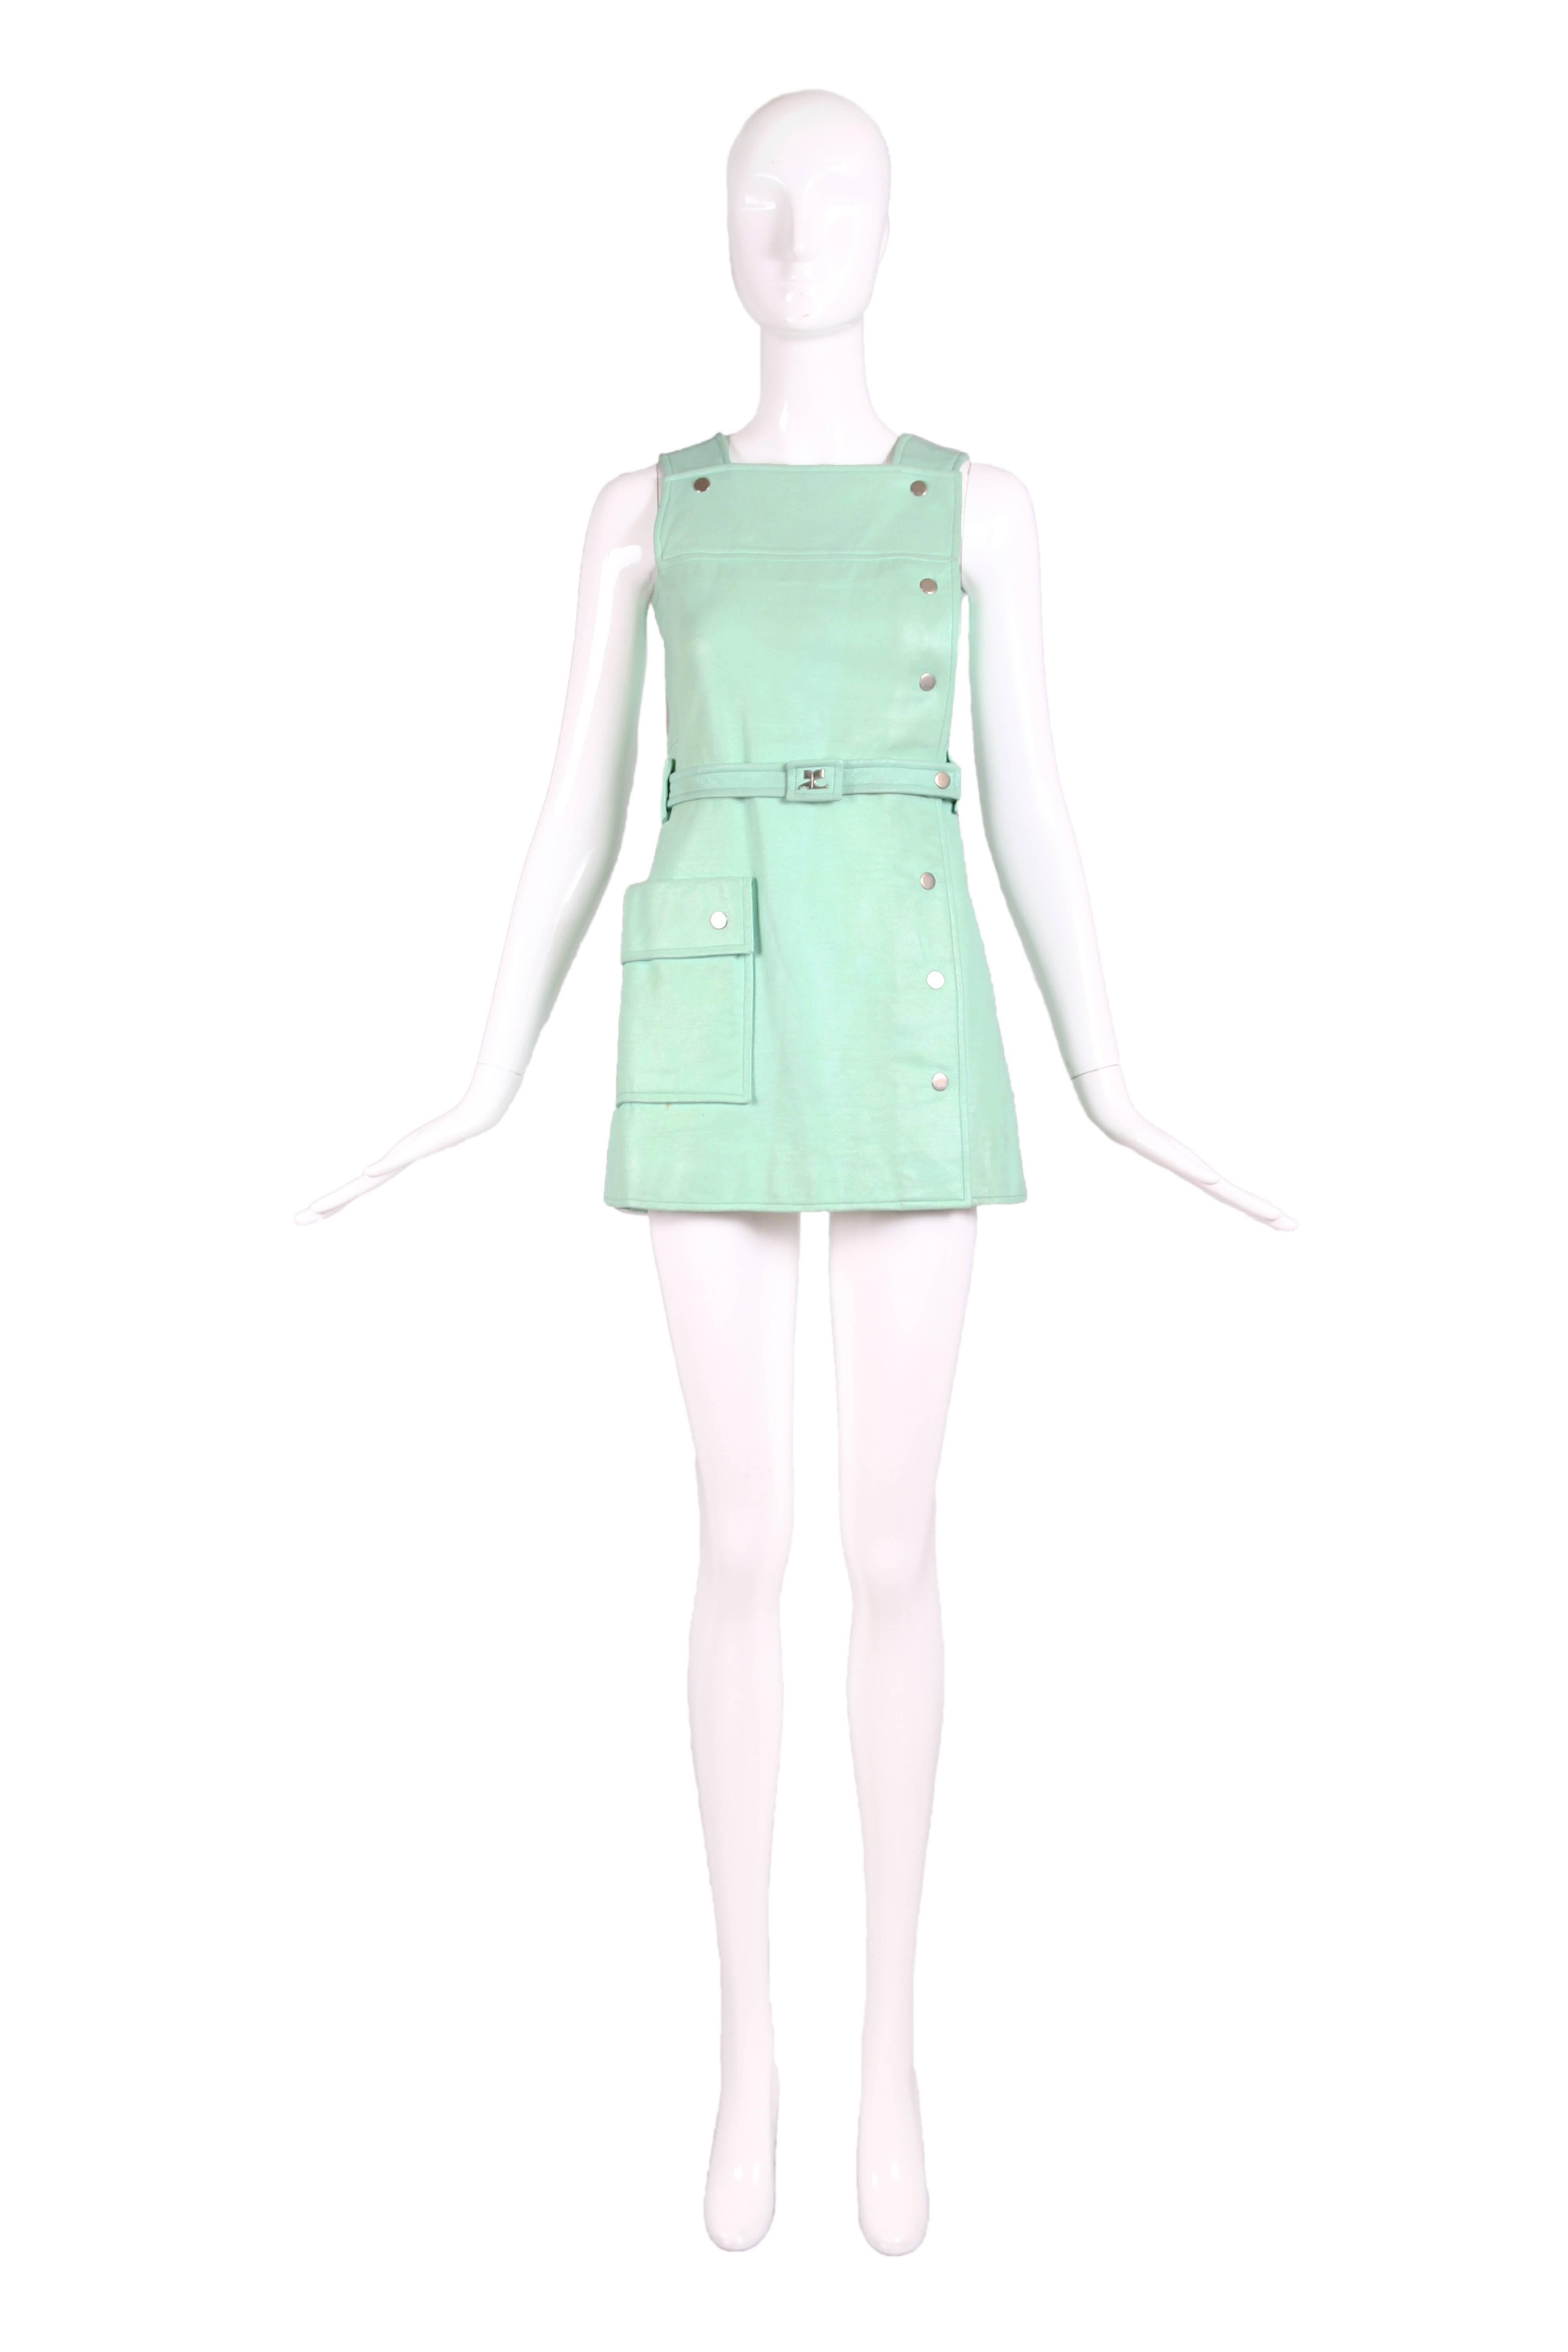 1970's Courreges aqua blue vinyl mini pinafore dress with silver metal snap closures, single side pocket, and belt with Courreges logo at center. Fully lined. In good vintage condition - mark at front that is hidden by the belt, and two minor